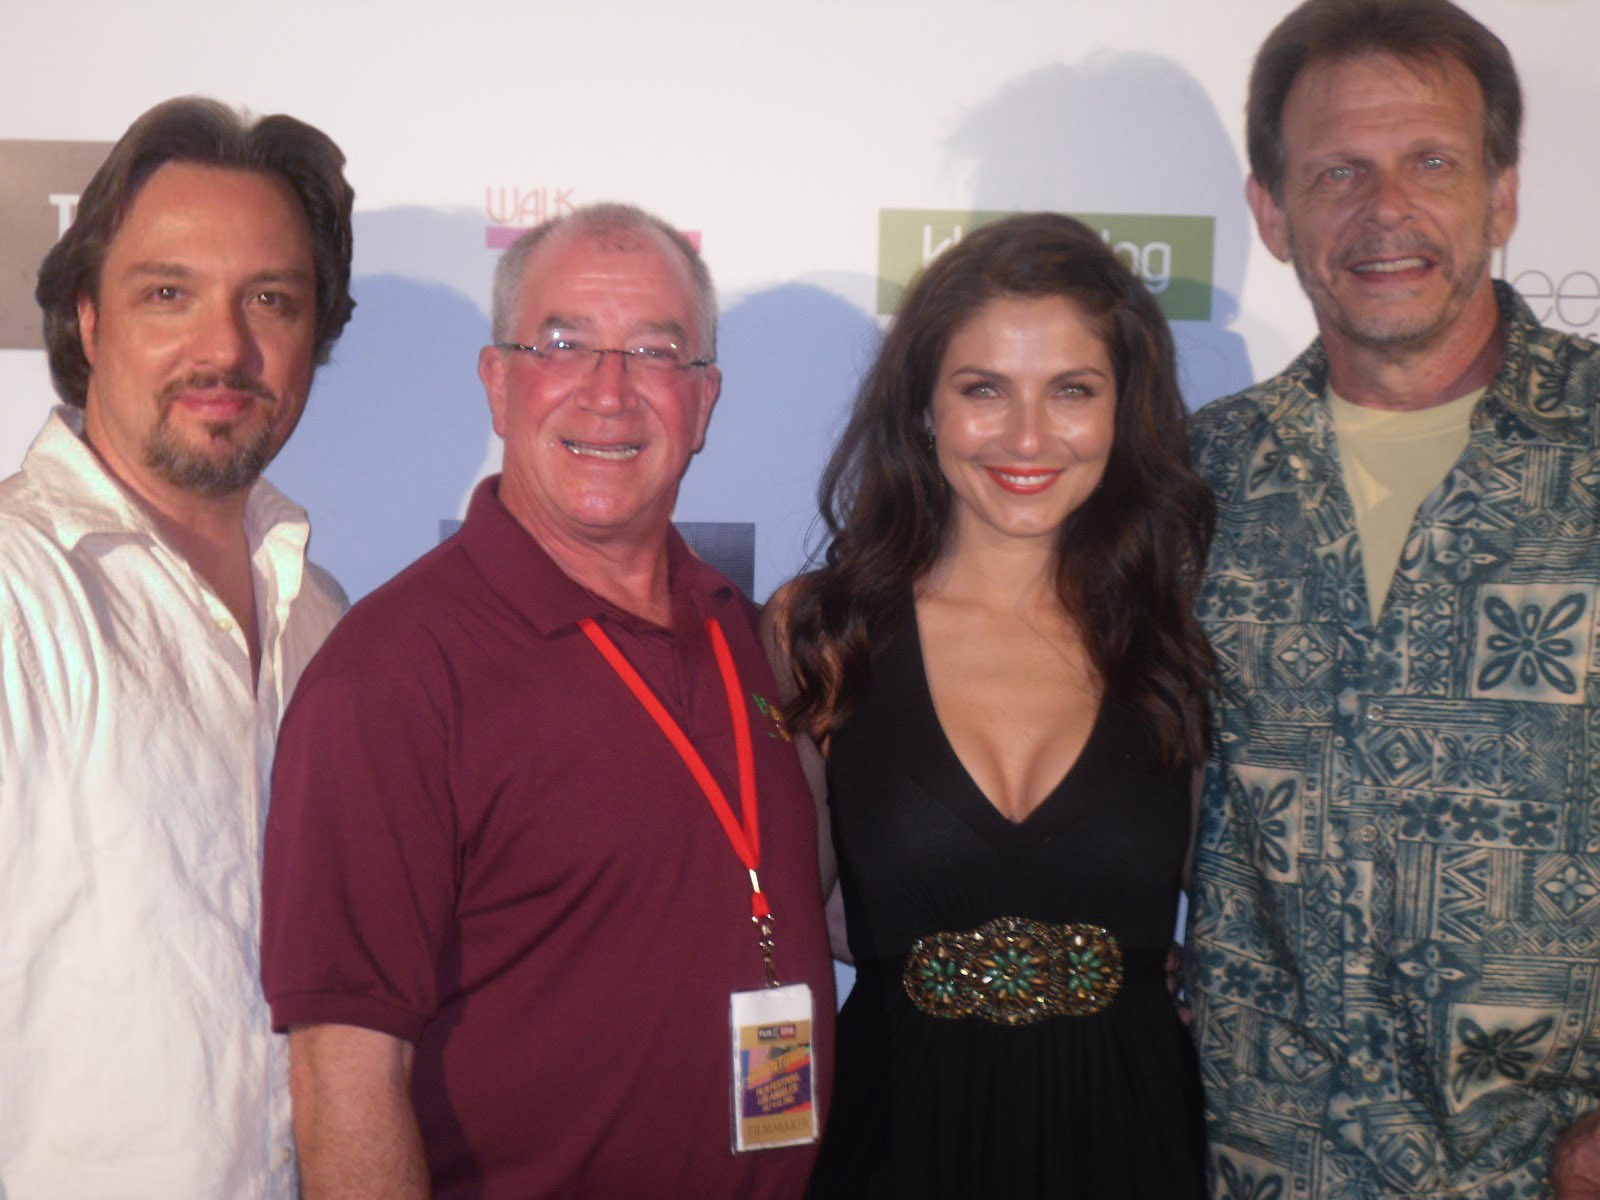 Kenneth Mader, Jeff Sable, Marisa Petroro and Marc Singer at the Los Angeles screening of 